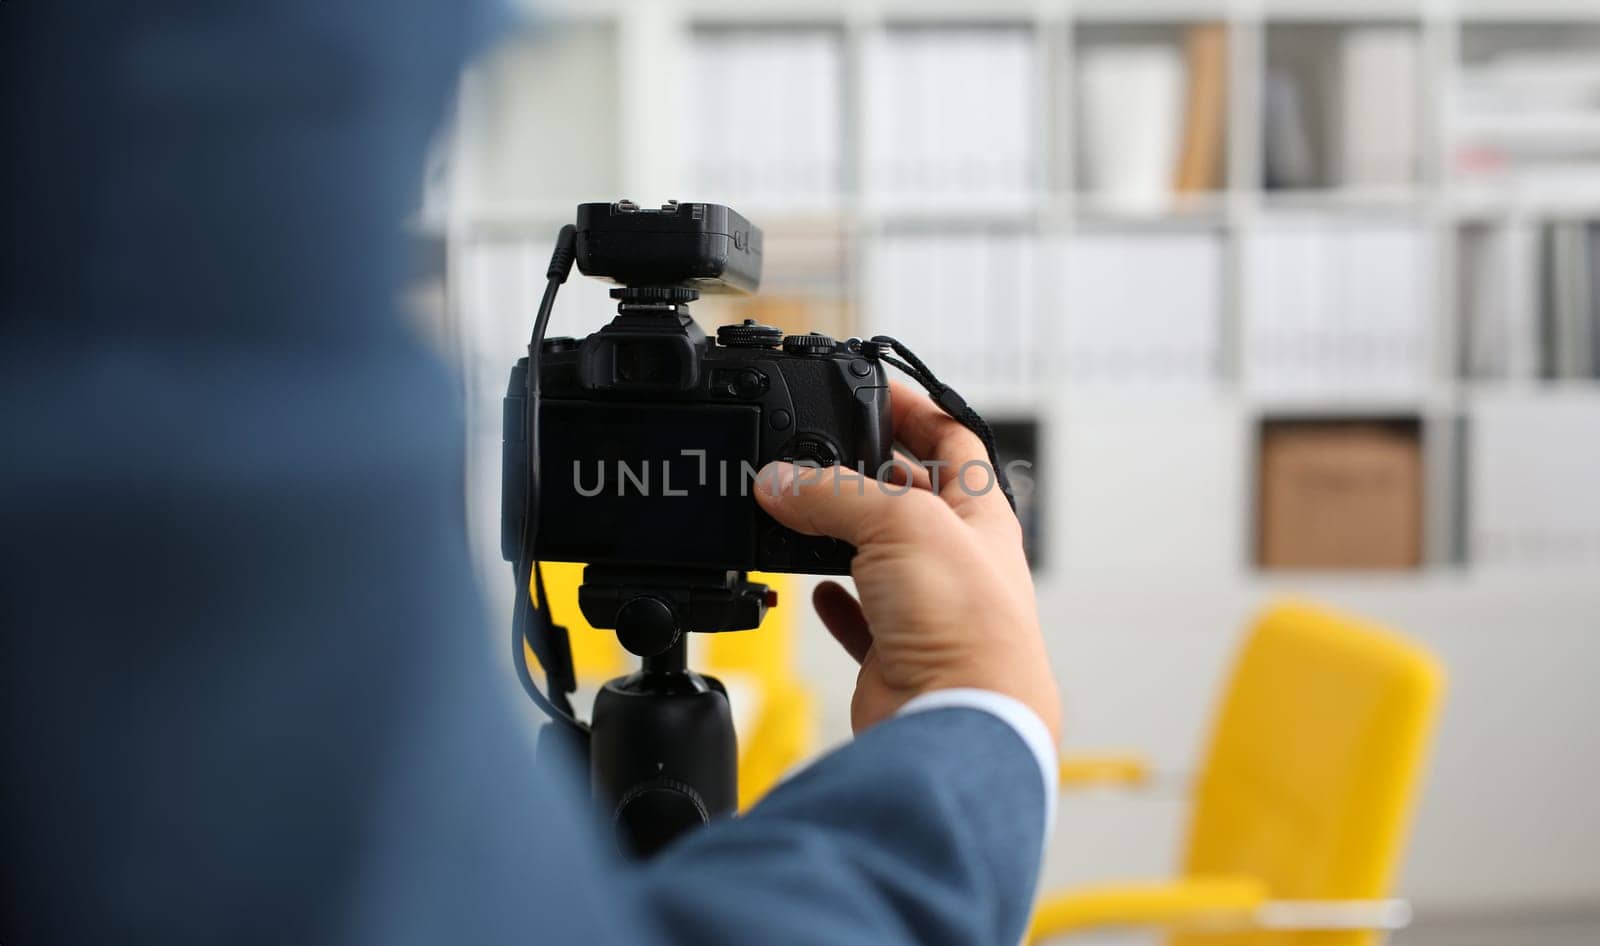 Male arms in suit mount camcorder to tripod making promo videoblog or photo session in office closeup. Vlogger adjust set up and check image quality to show job offer promotion selfie information